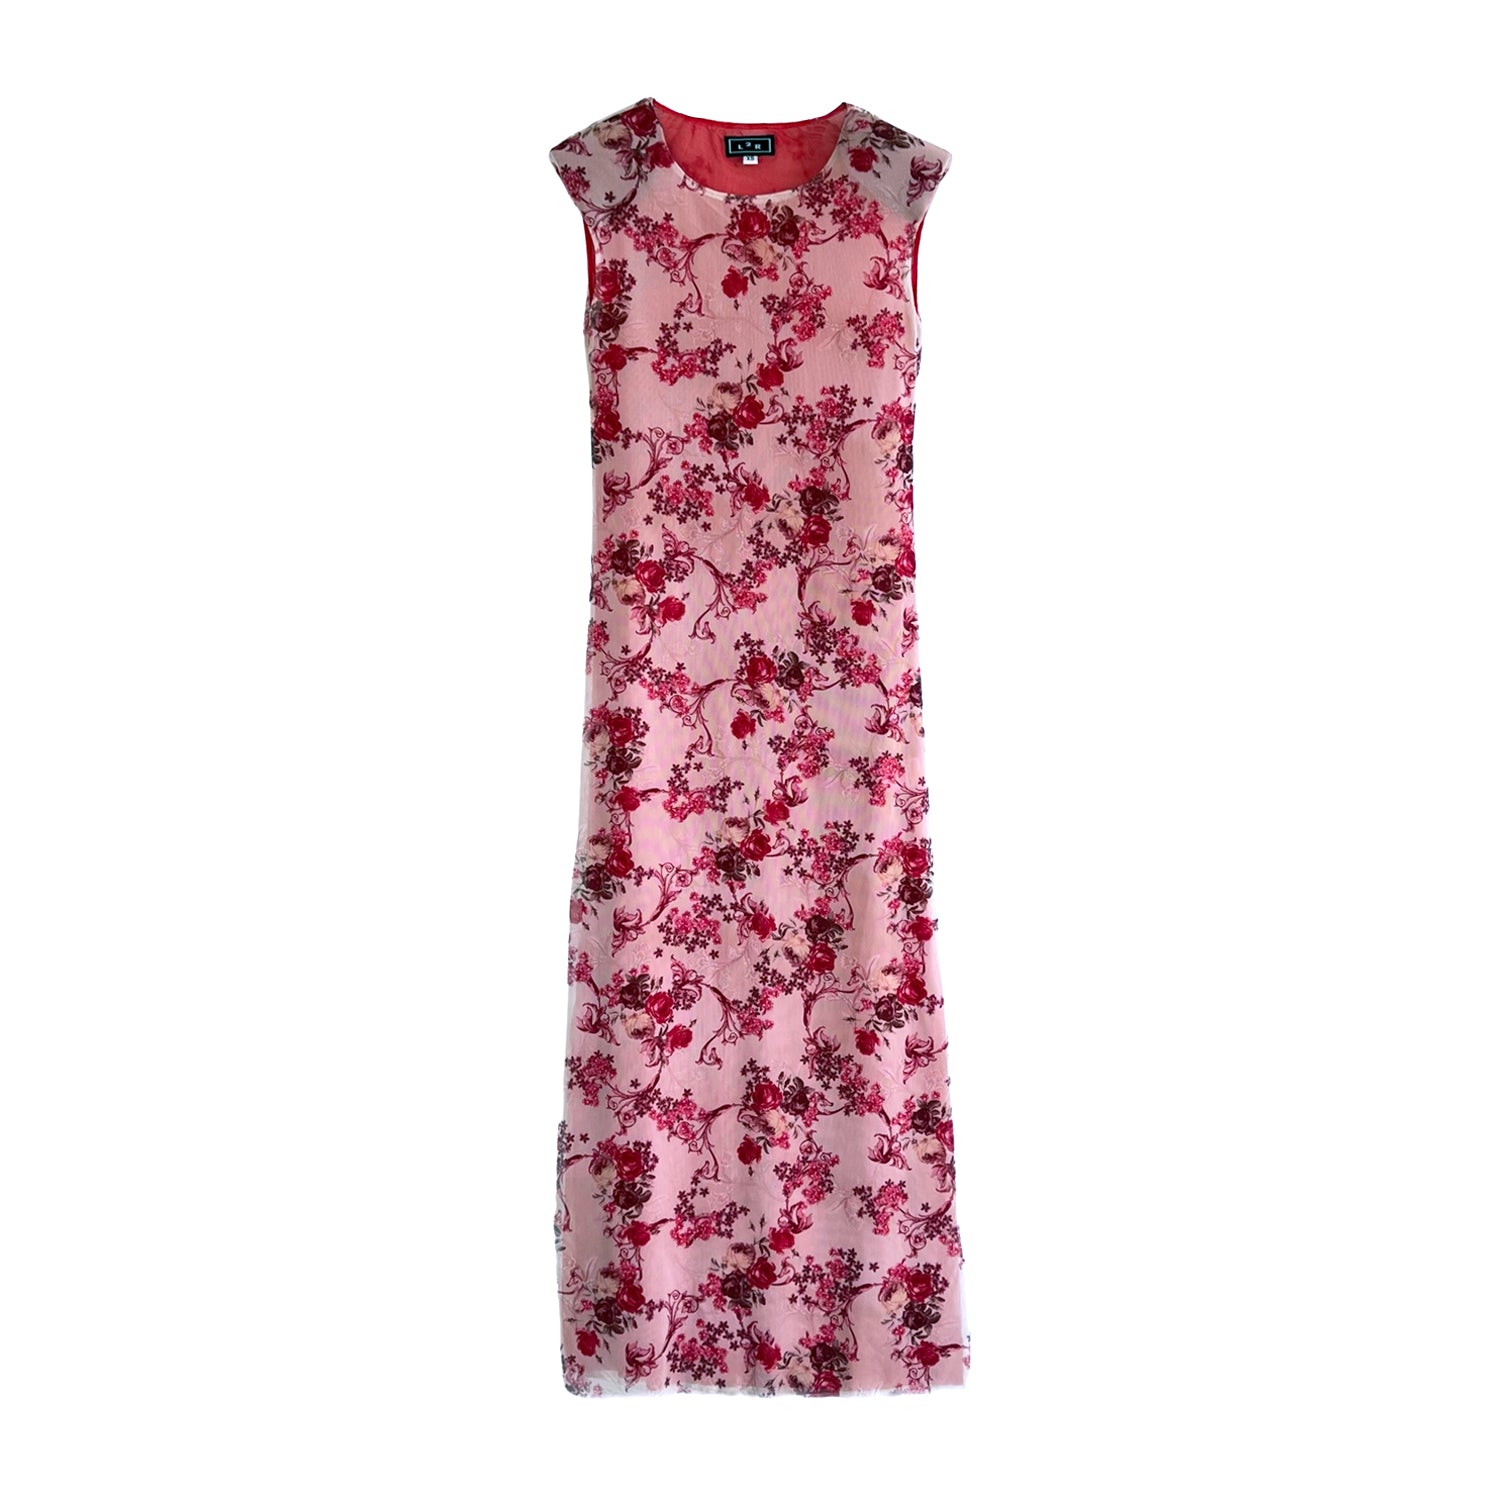 L2r The Label Women's Pink / Purple Shoulder Pad Printed Mesh Dress In Red & Pink In Pink/purple